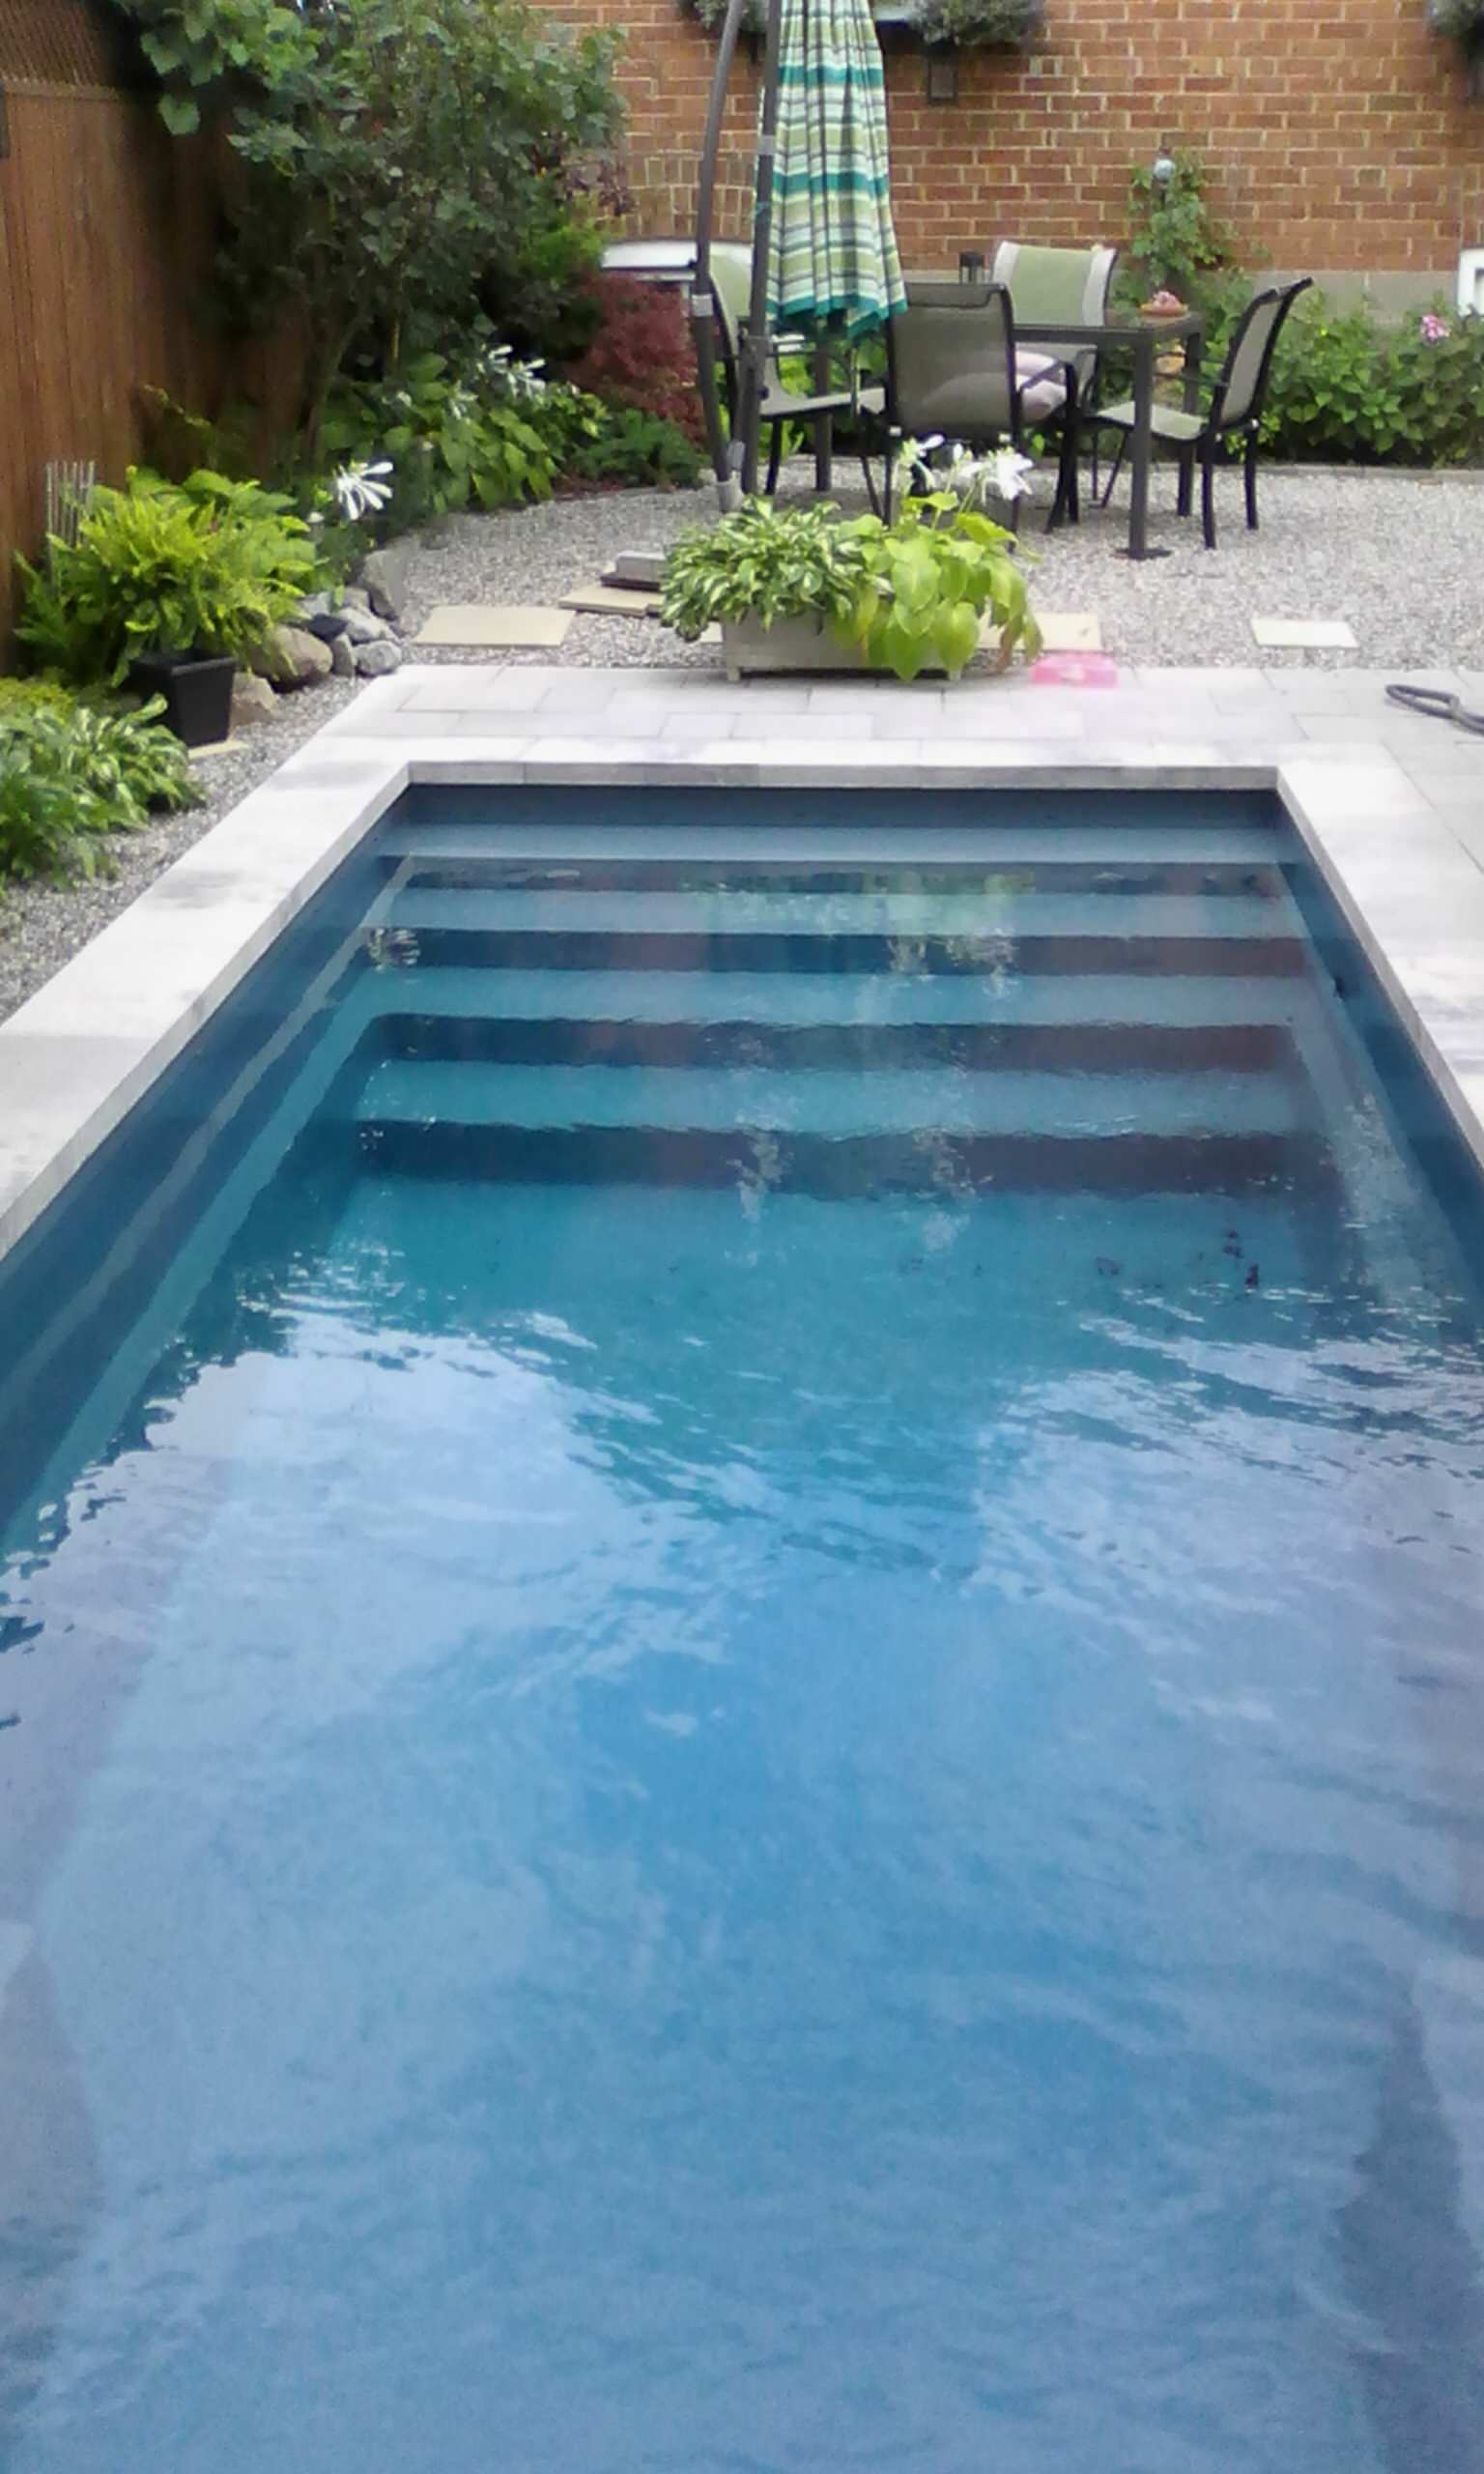 The East York Small Pool Project